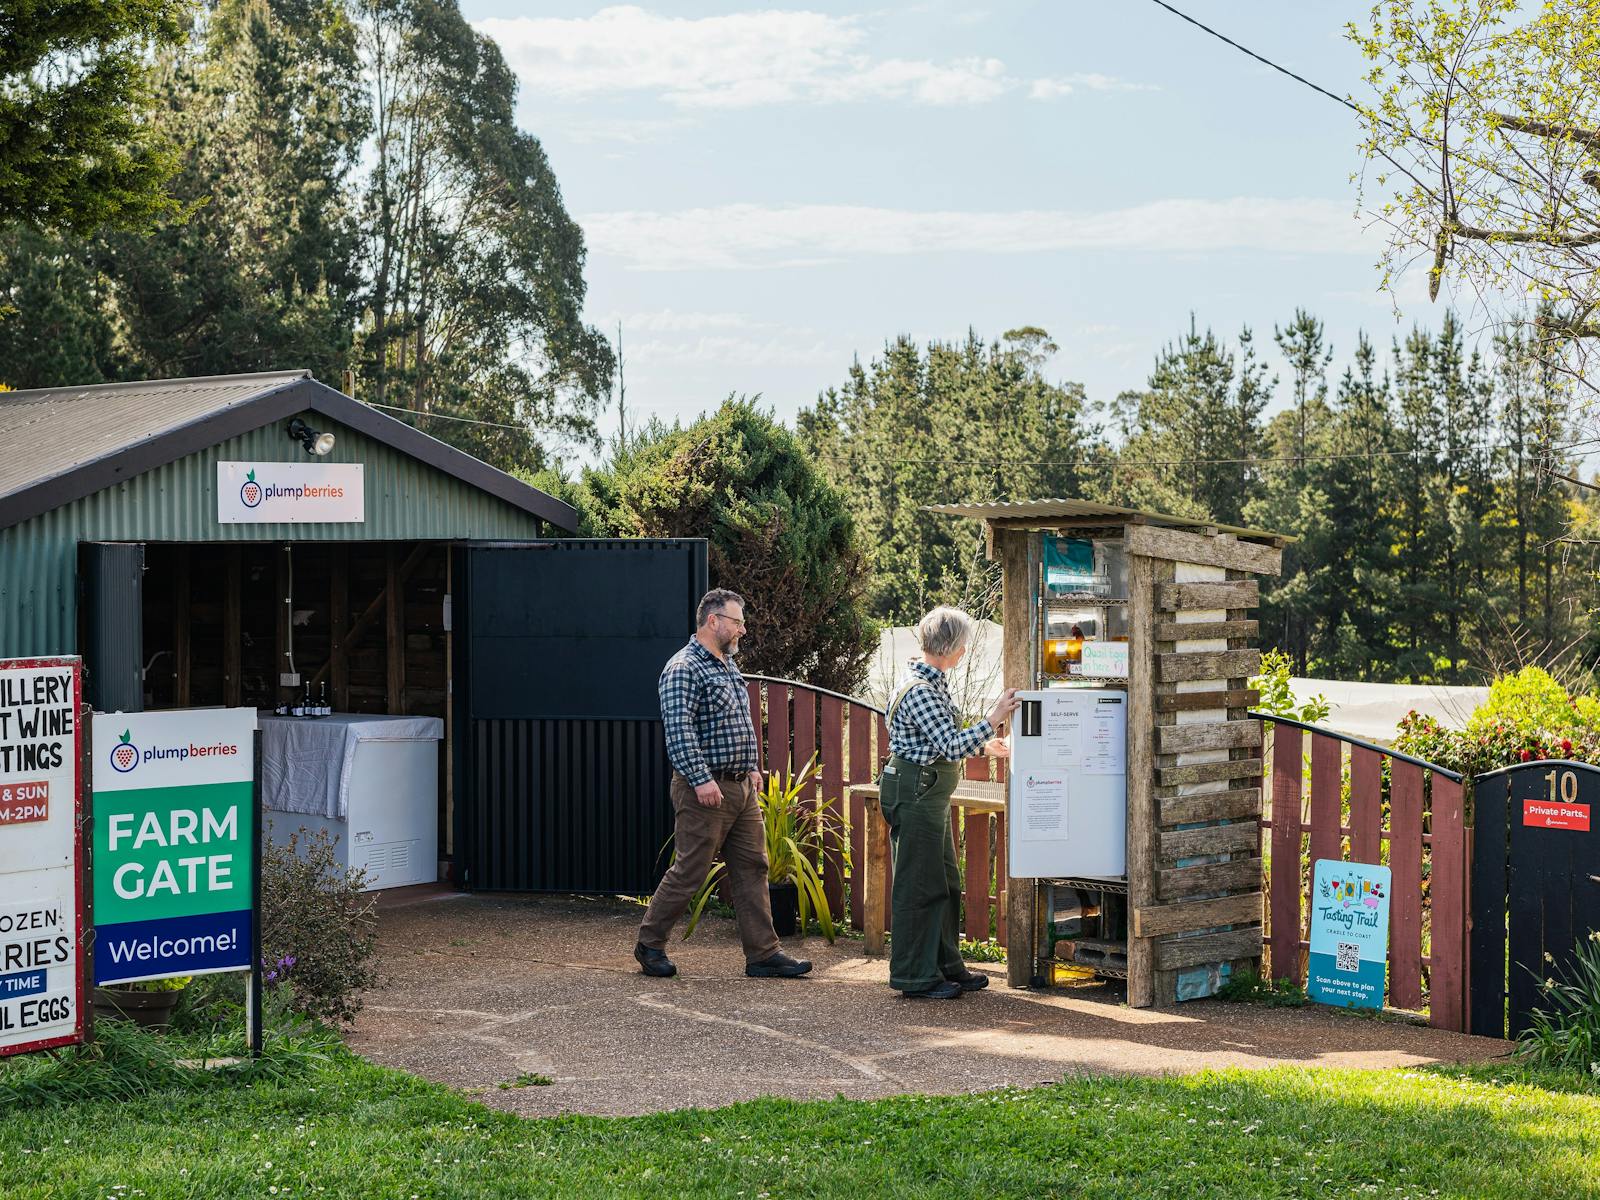 farm gate shed and self-serve station with two people